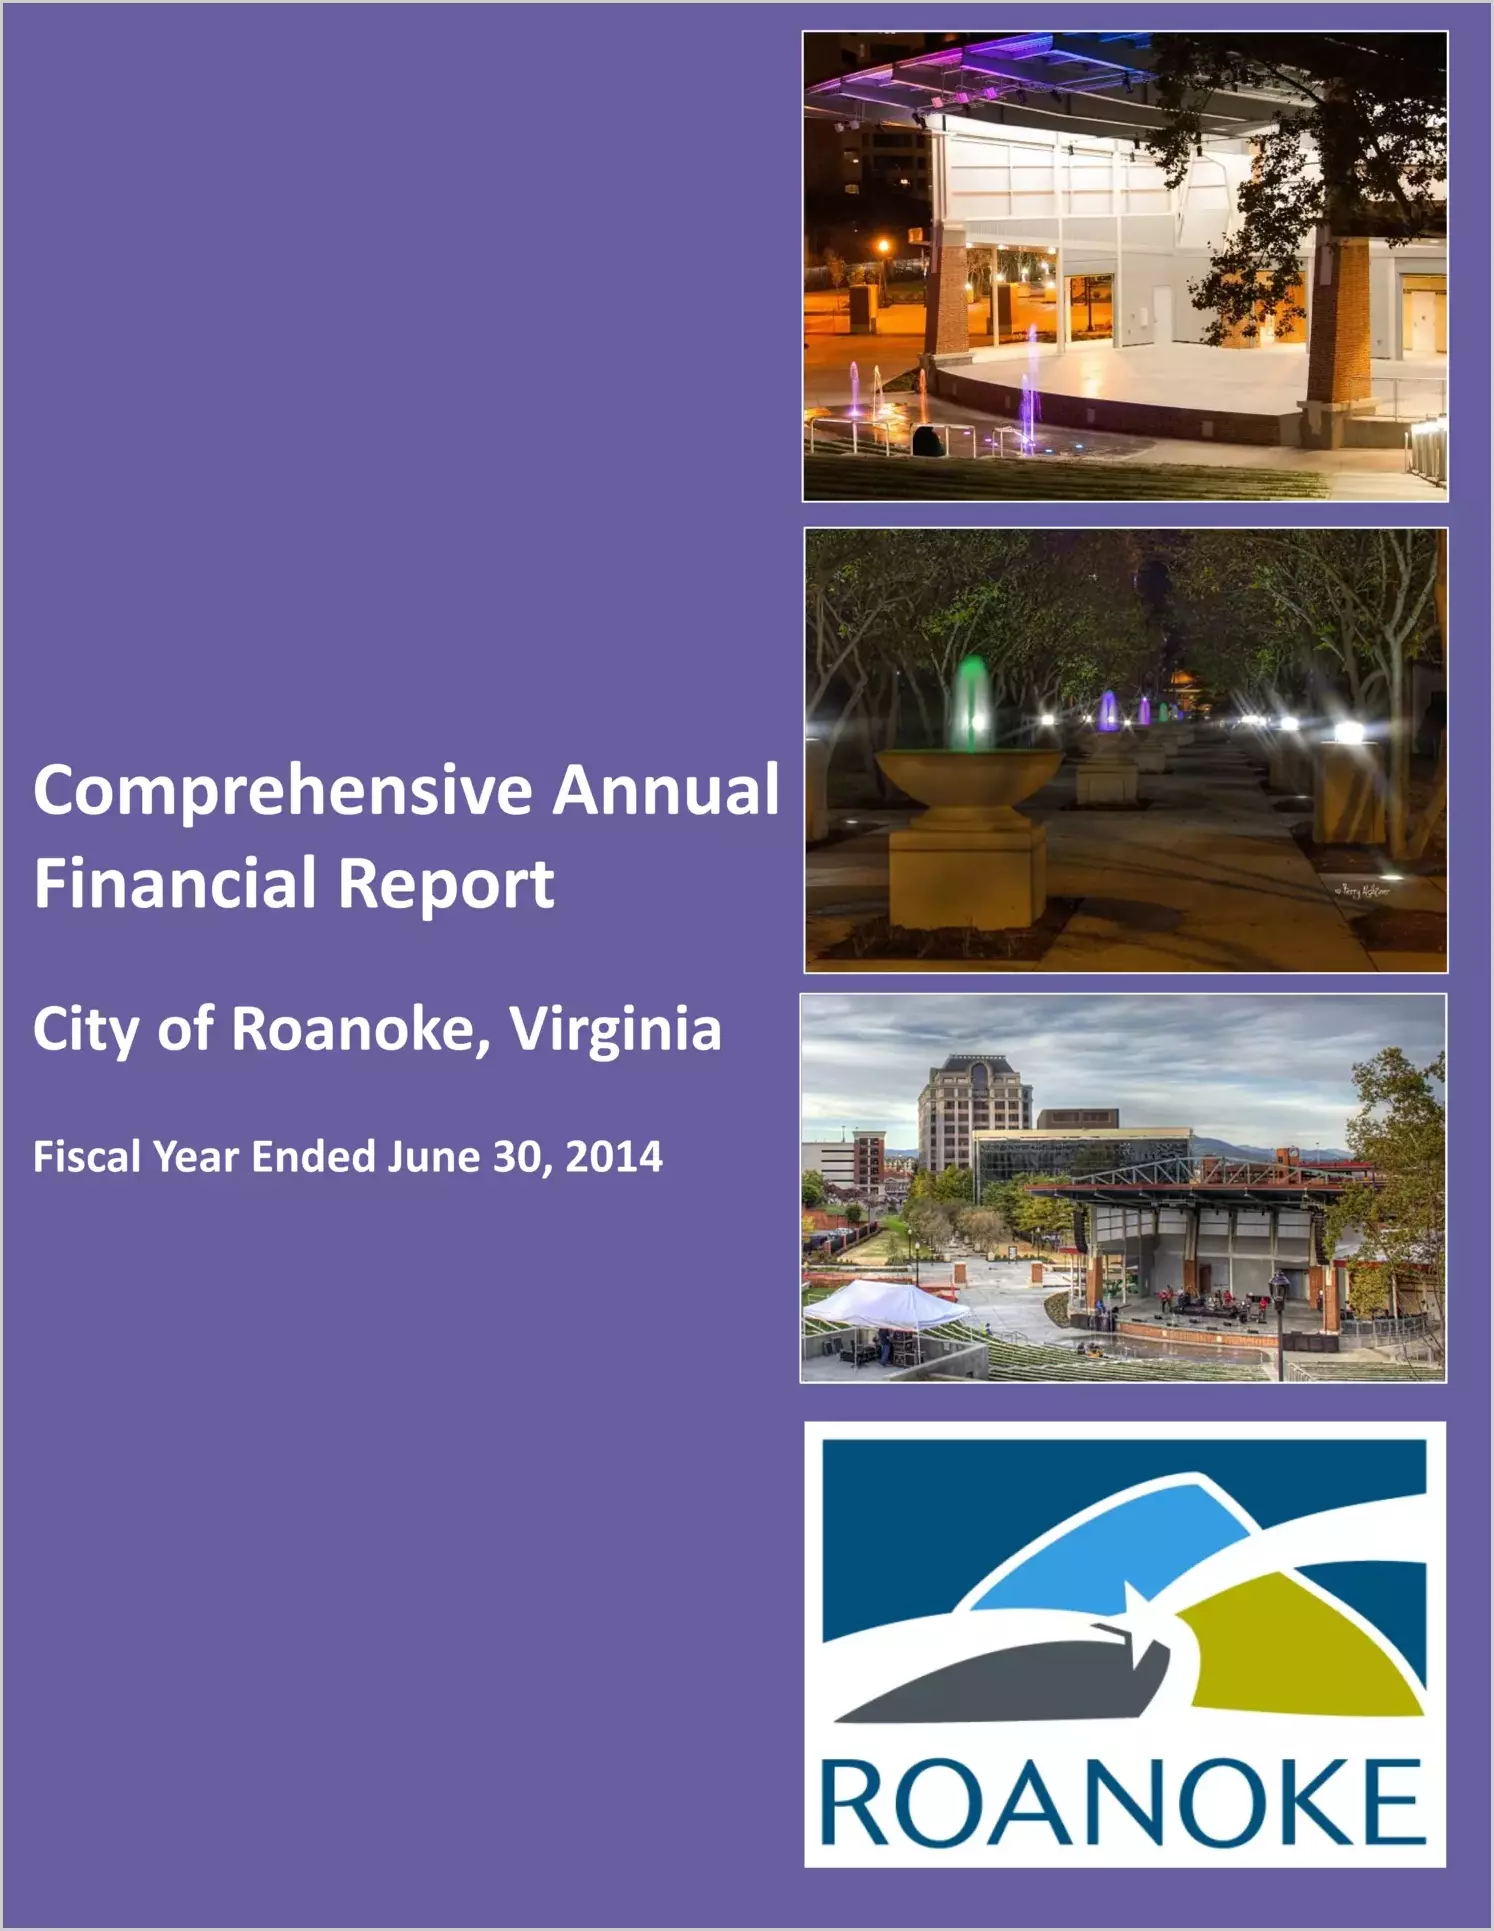 2014 Annual Financial Report for City of Roanoke